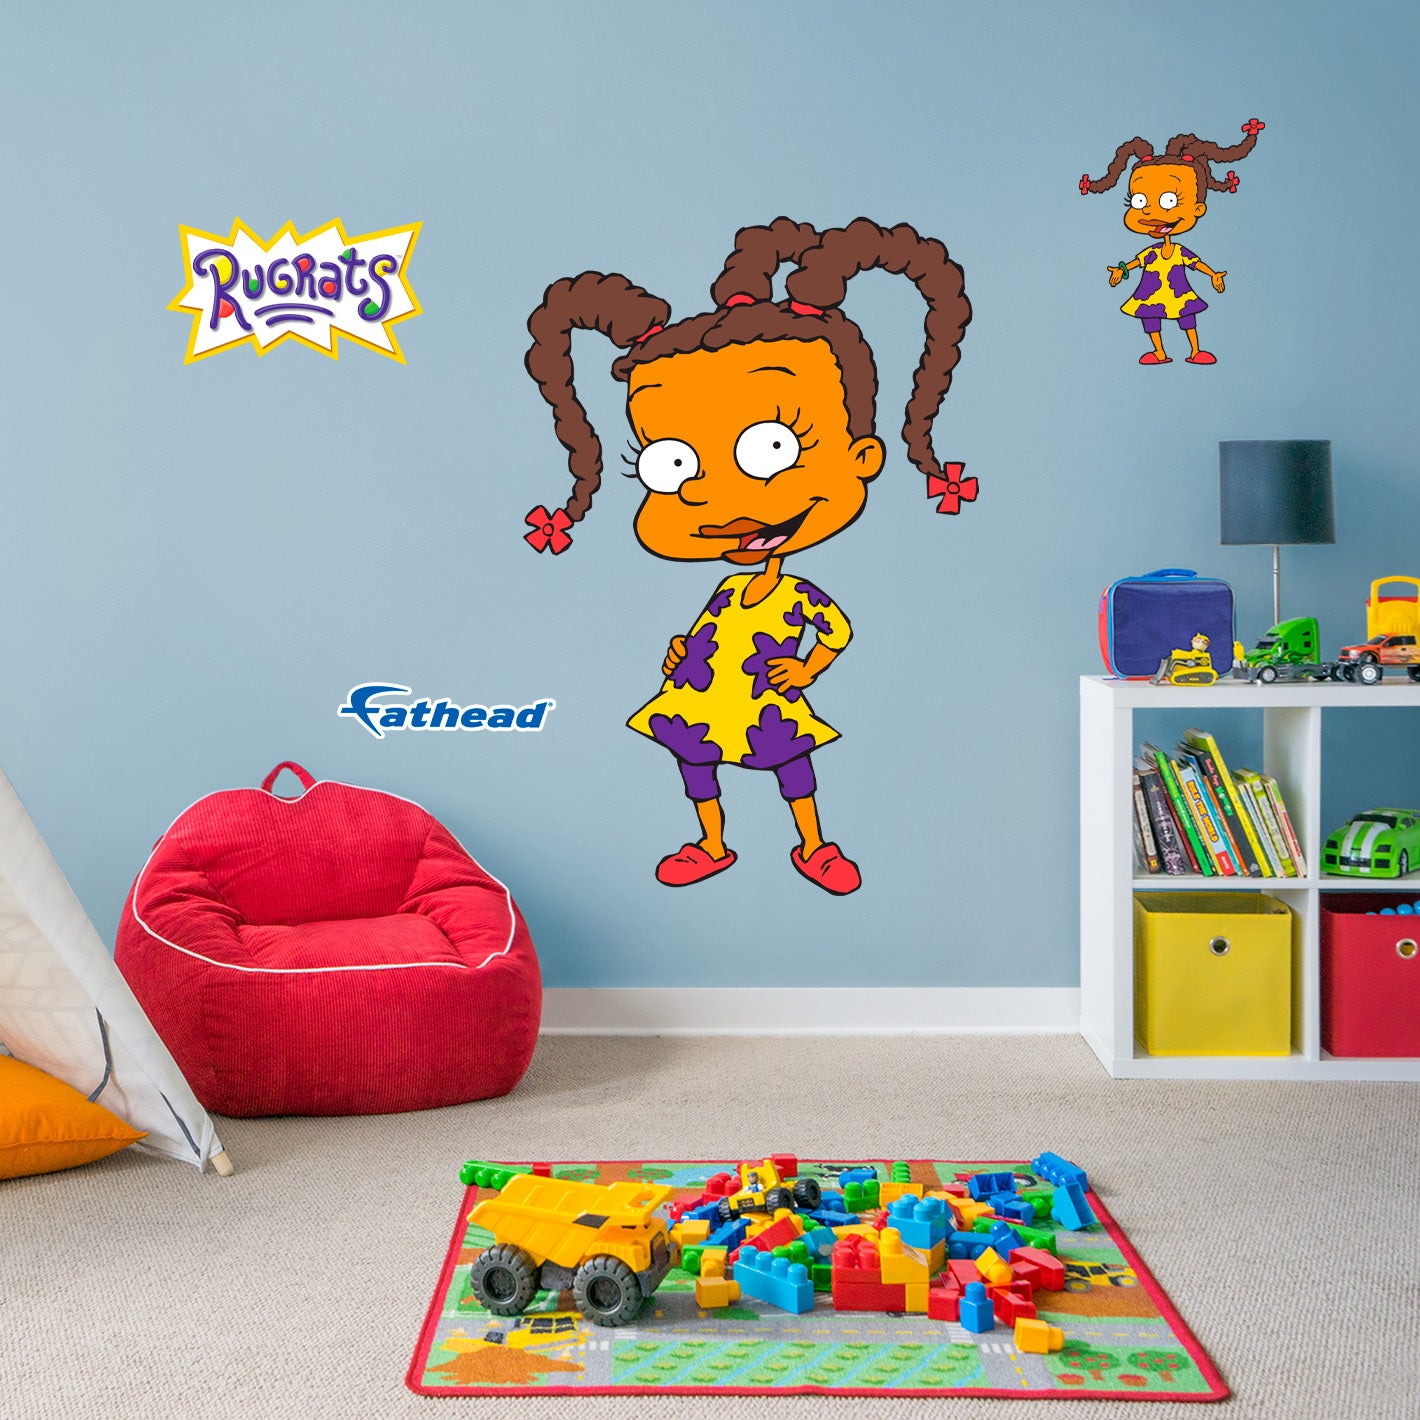 Rugrats: Susie Carmichael RealBigs        - Officially Licensed Nickelodeon Removable     Adhesive Decal